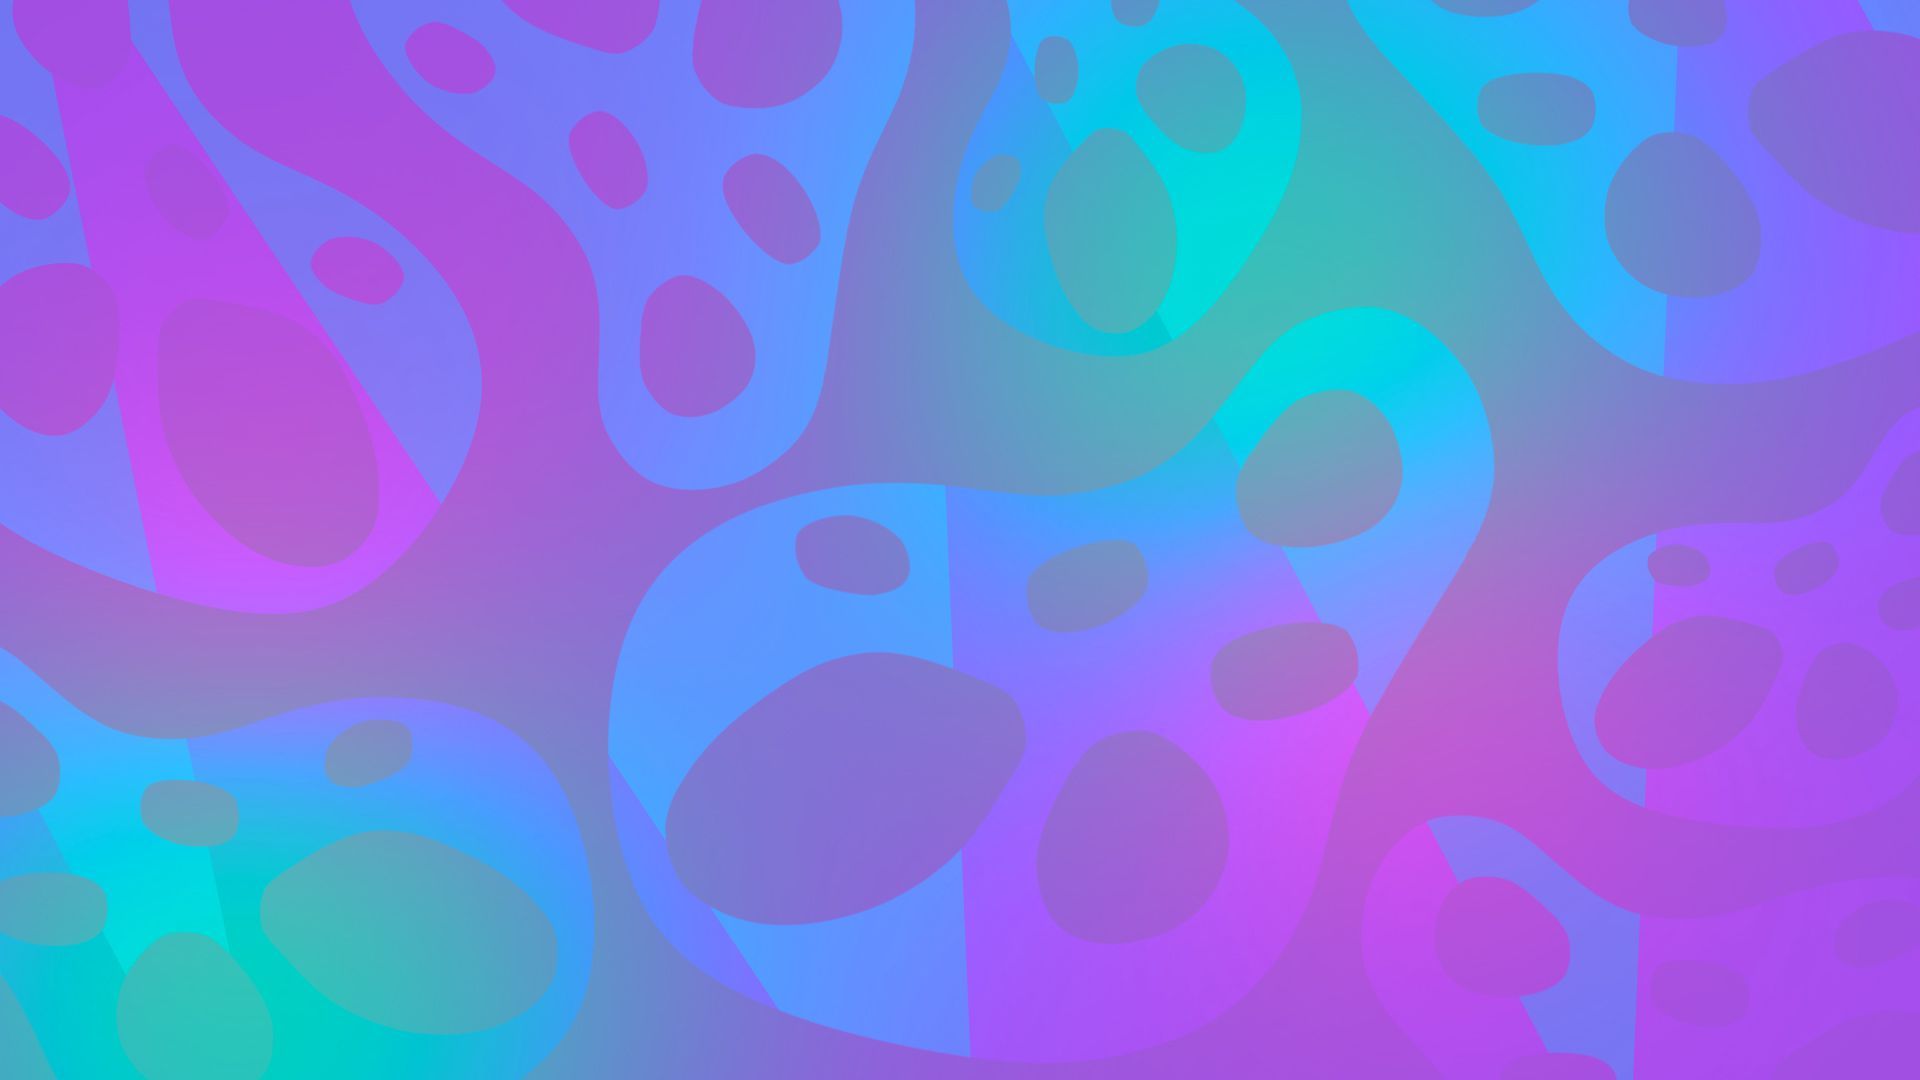 Illustration of a pattern of colorful abstract gradient shapes. 